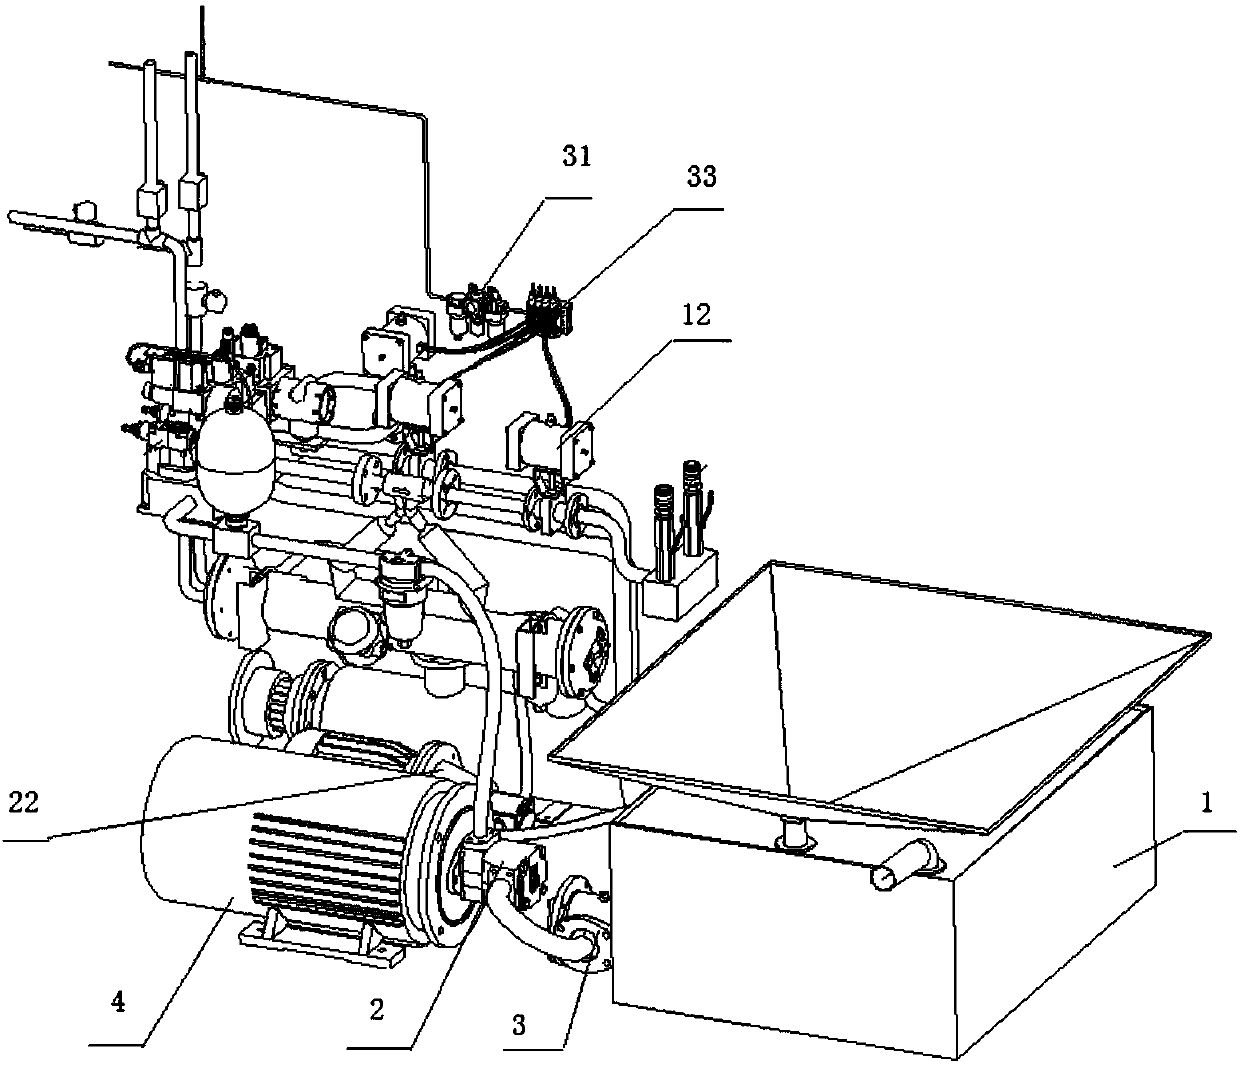 Valve body detection system of automatic gearbox